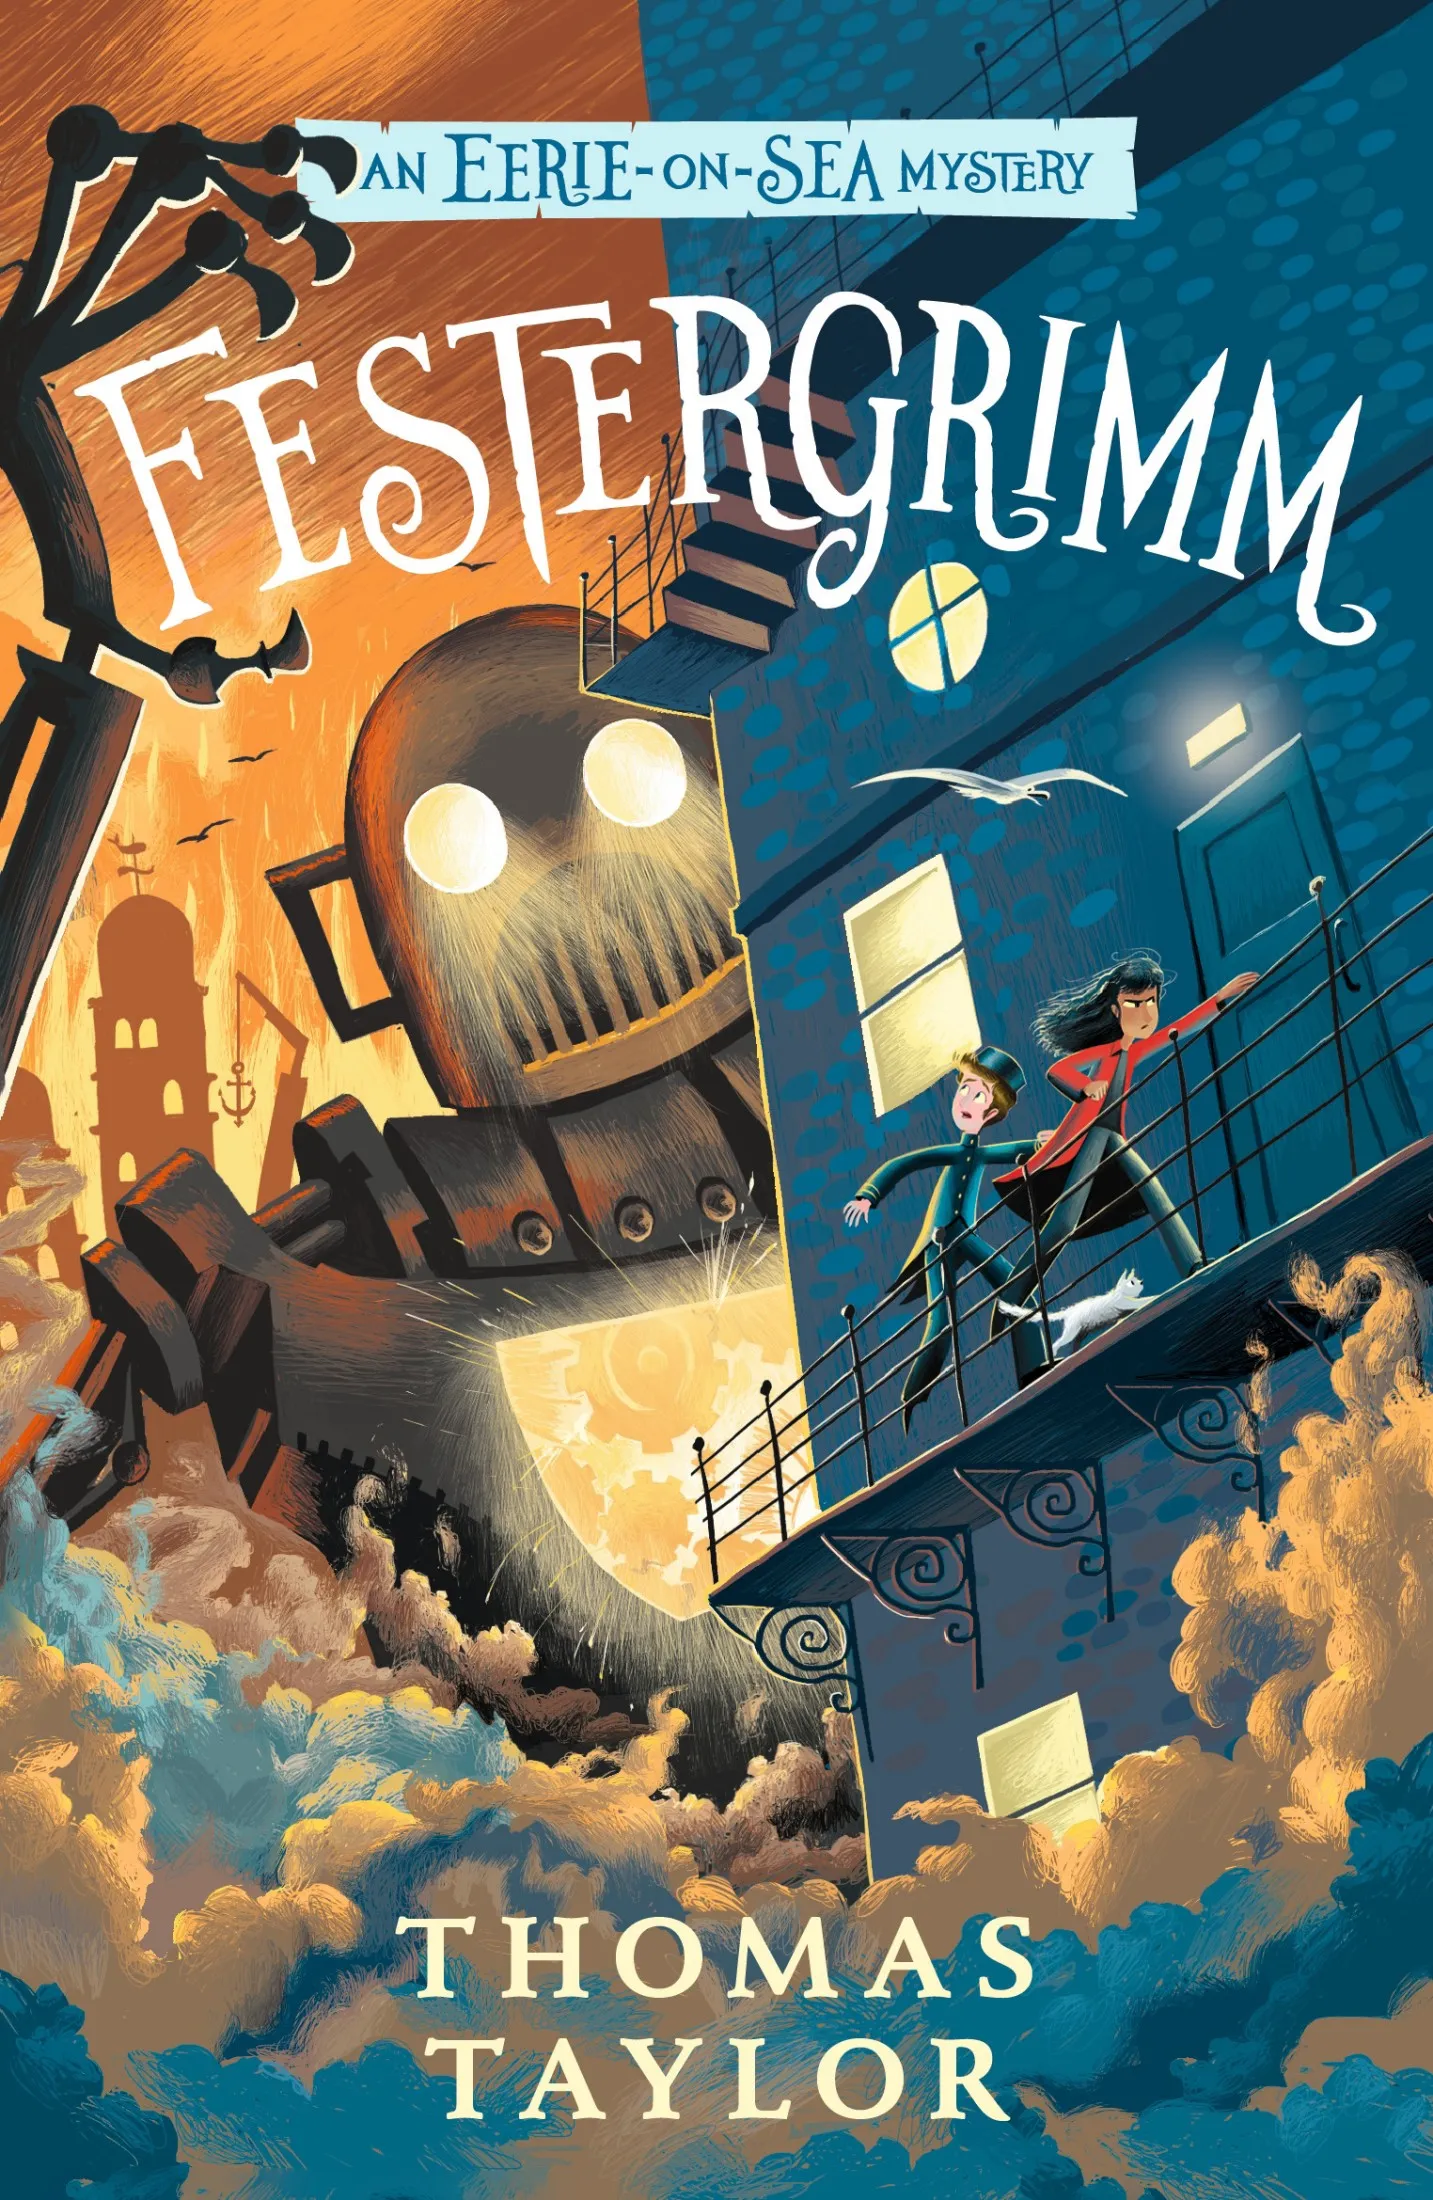 Festergrimm (An Eerie-on-Sea Mystery #4)